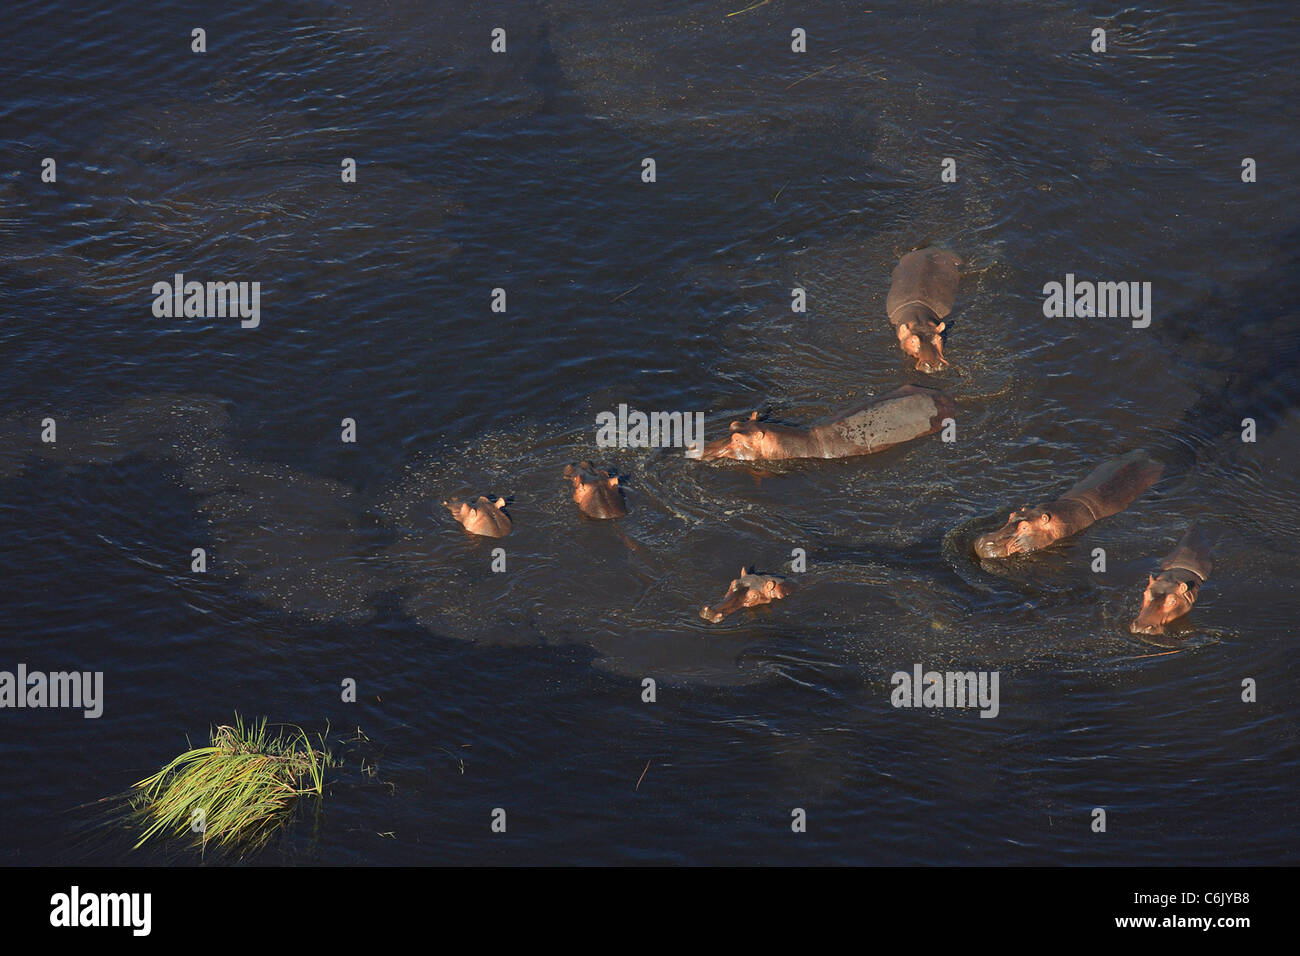 Aerial view of Hippo pod in water Stock Photo